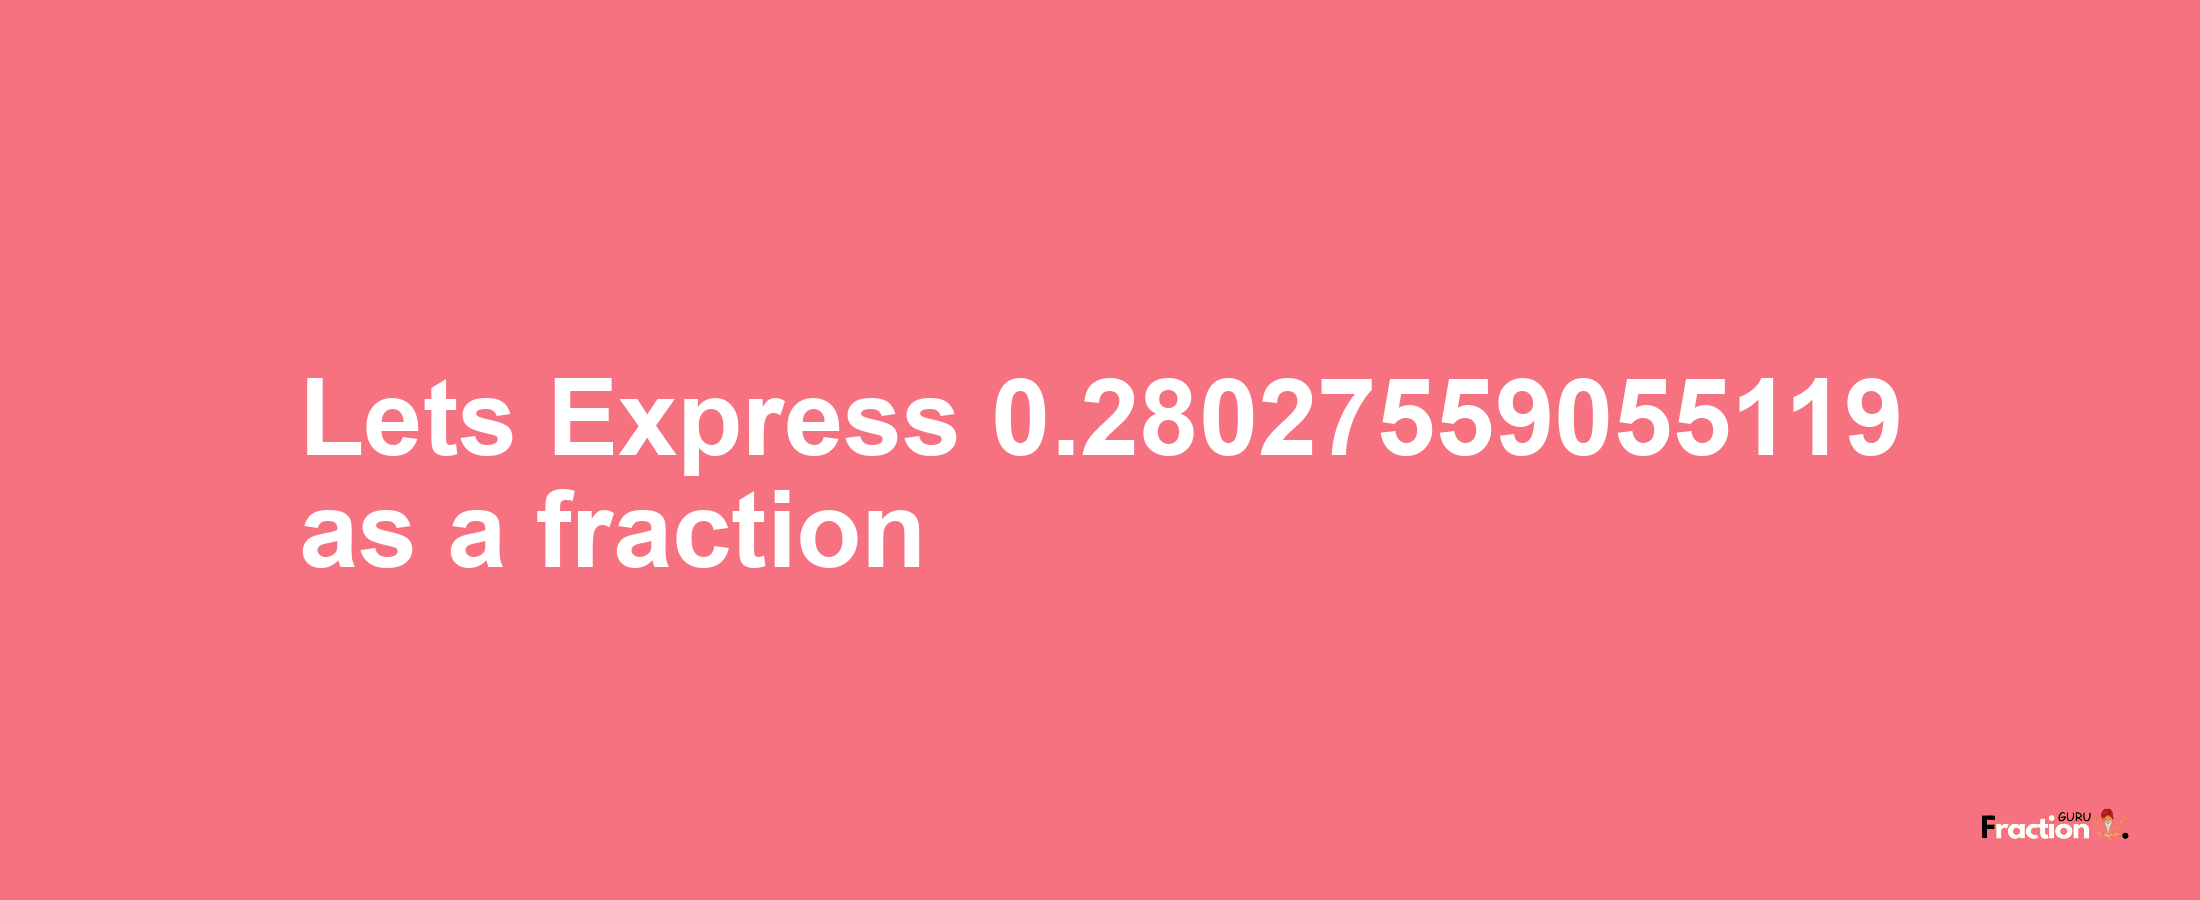 Lets Express 0.28027559055119 as afraction